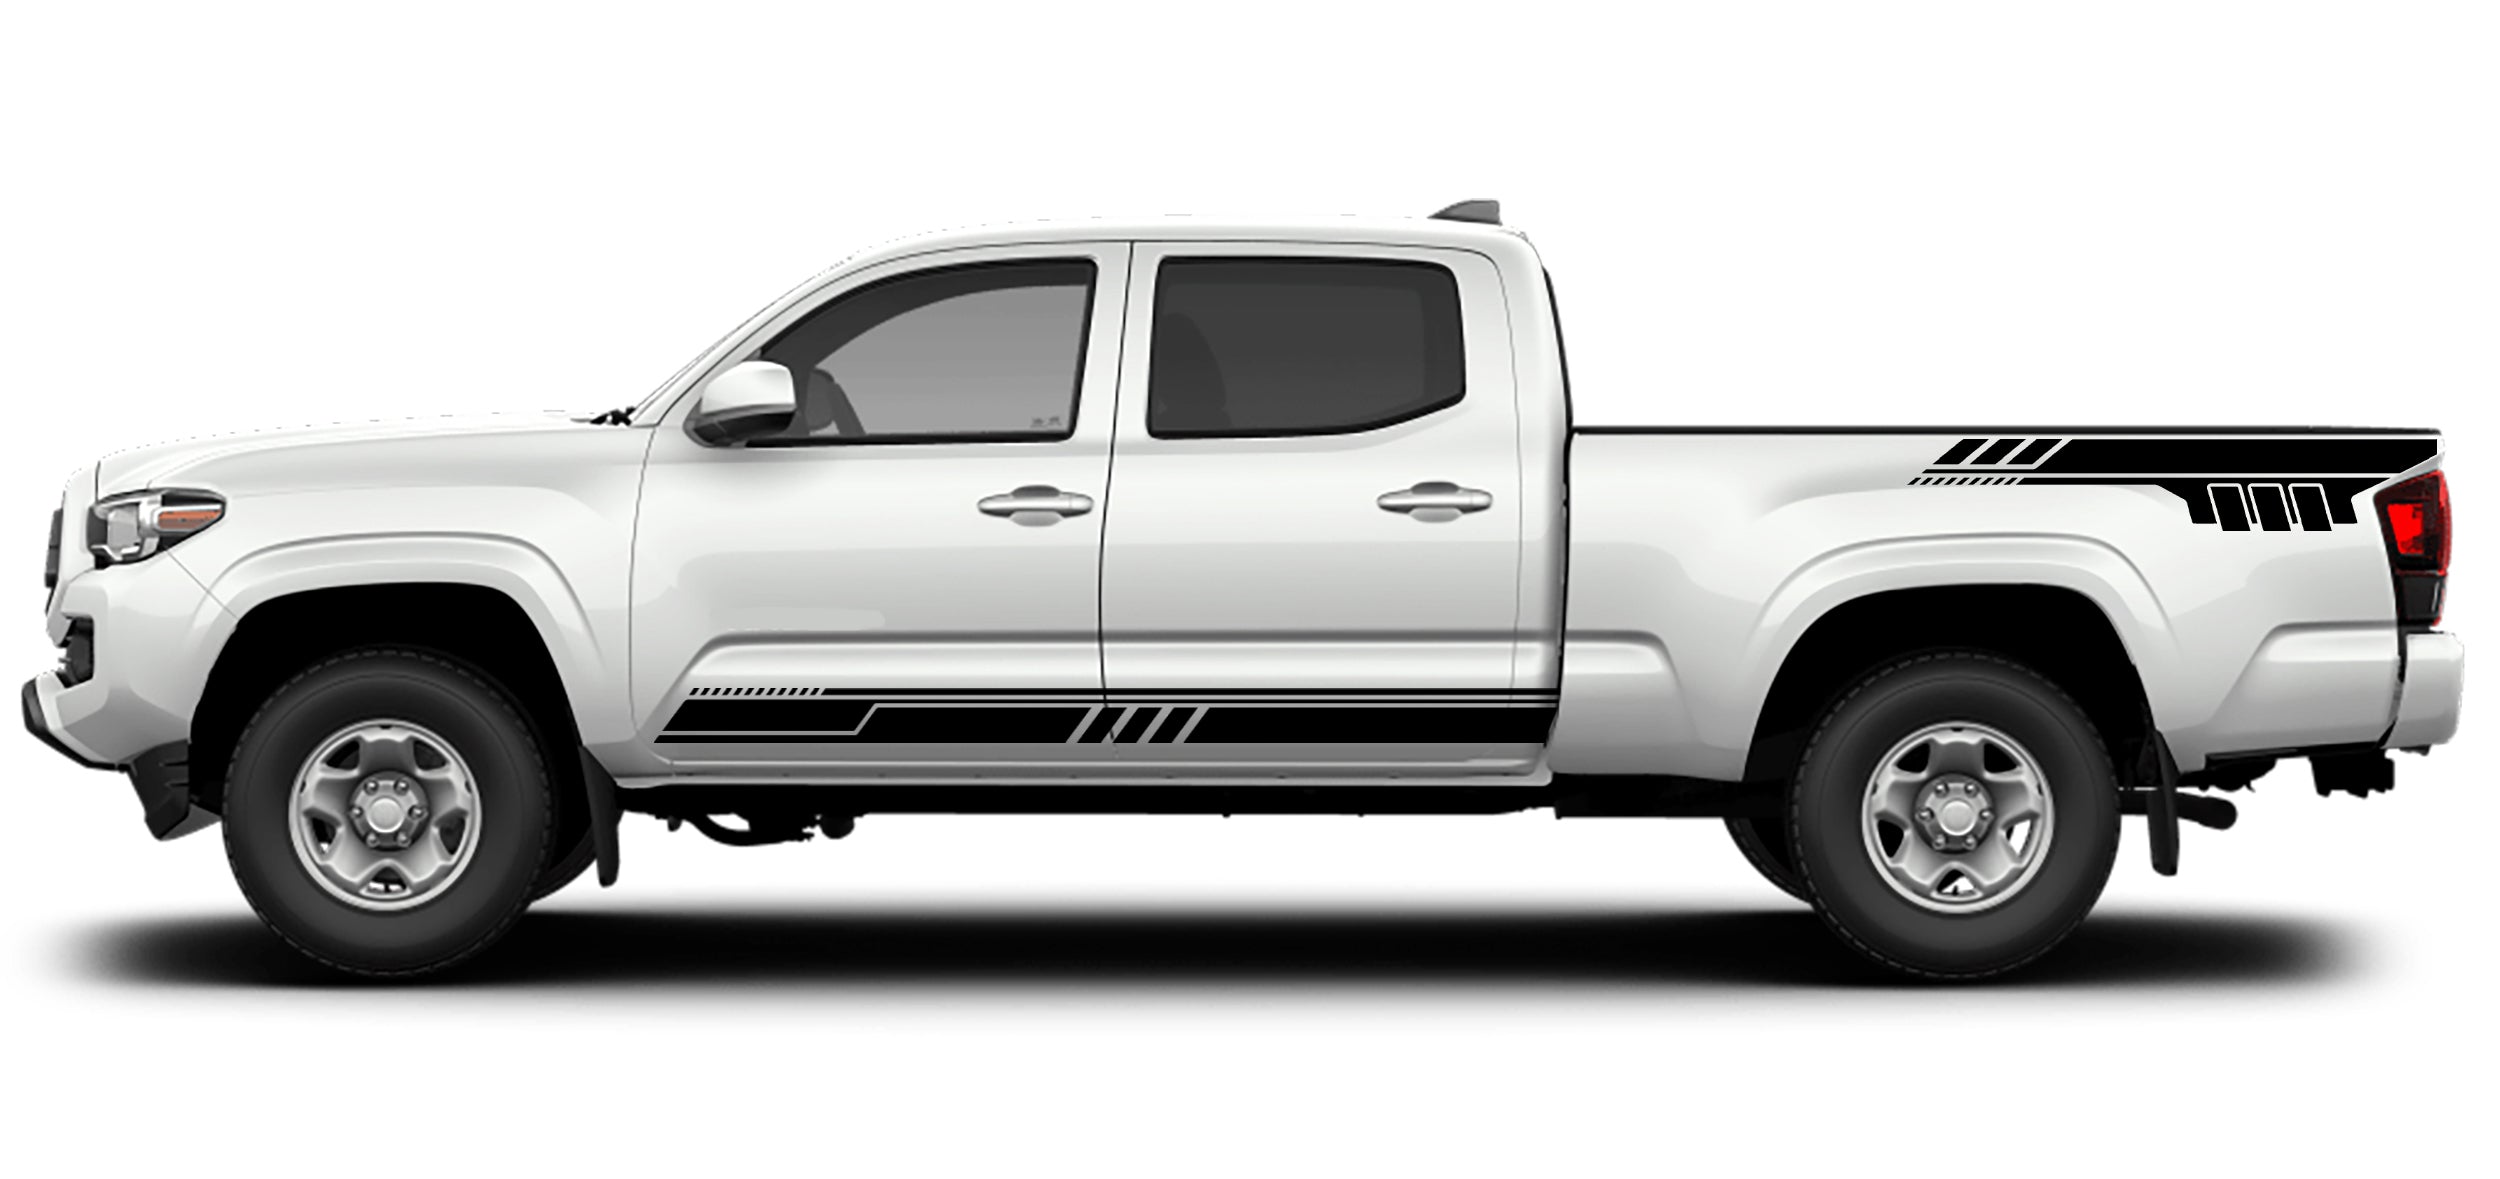 Toyota Tacoma Rocker Panel and Bed Decals (Pair) : Vinyl Graphics Kit Fits (2016-2022)